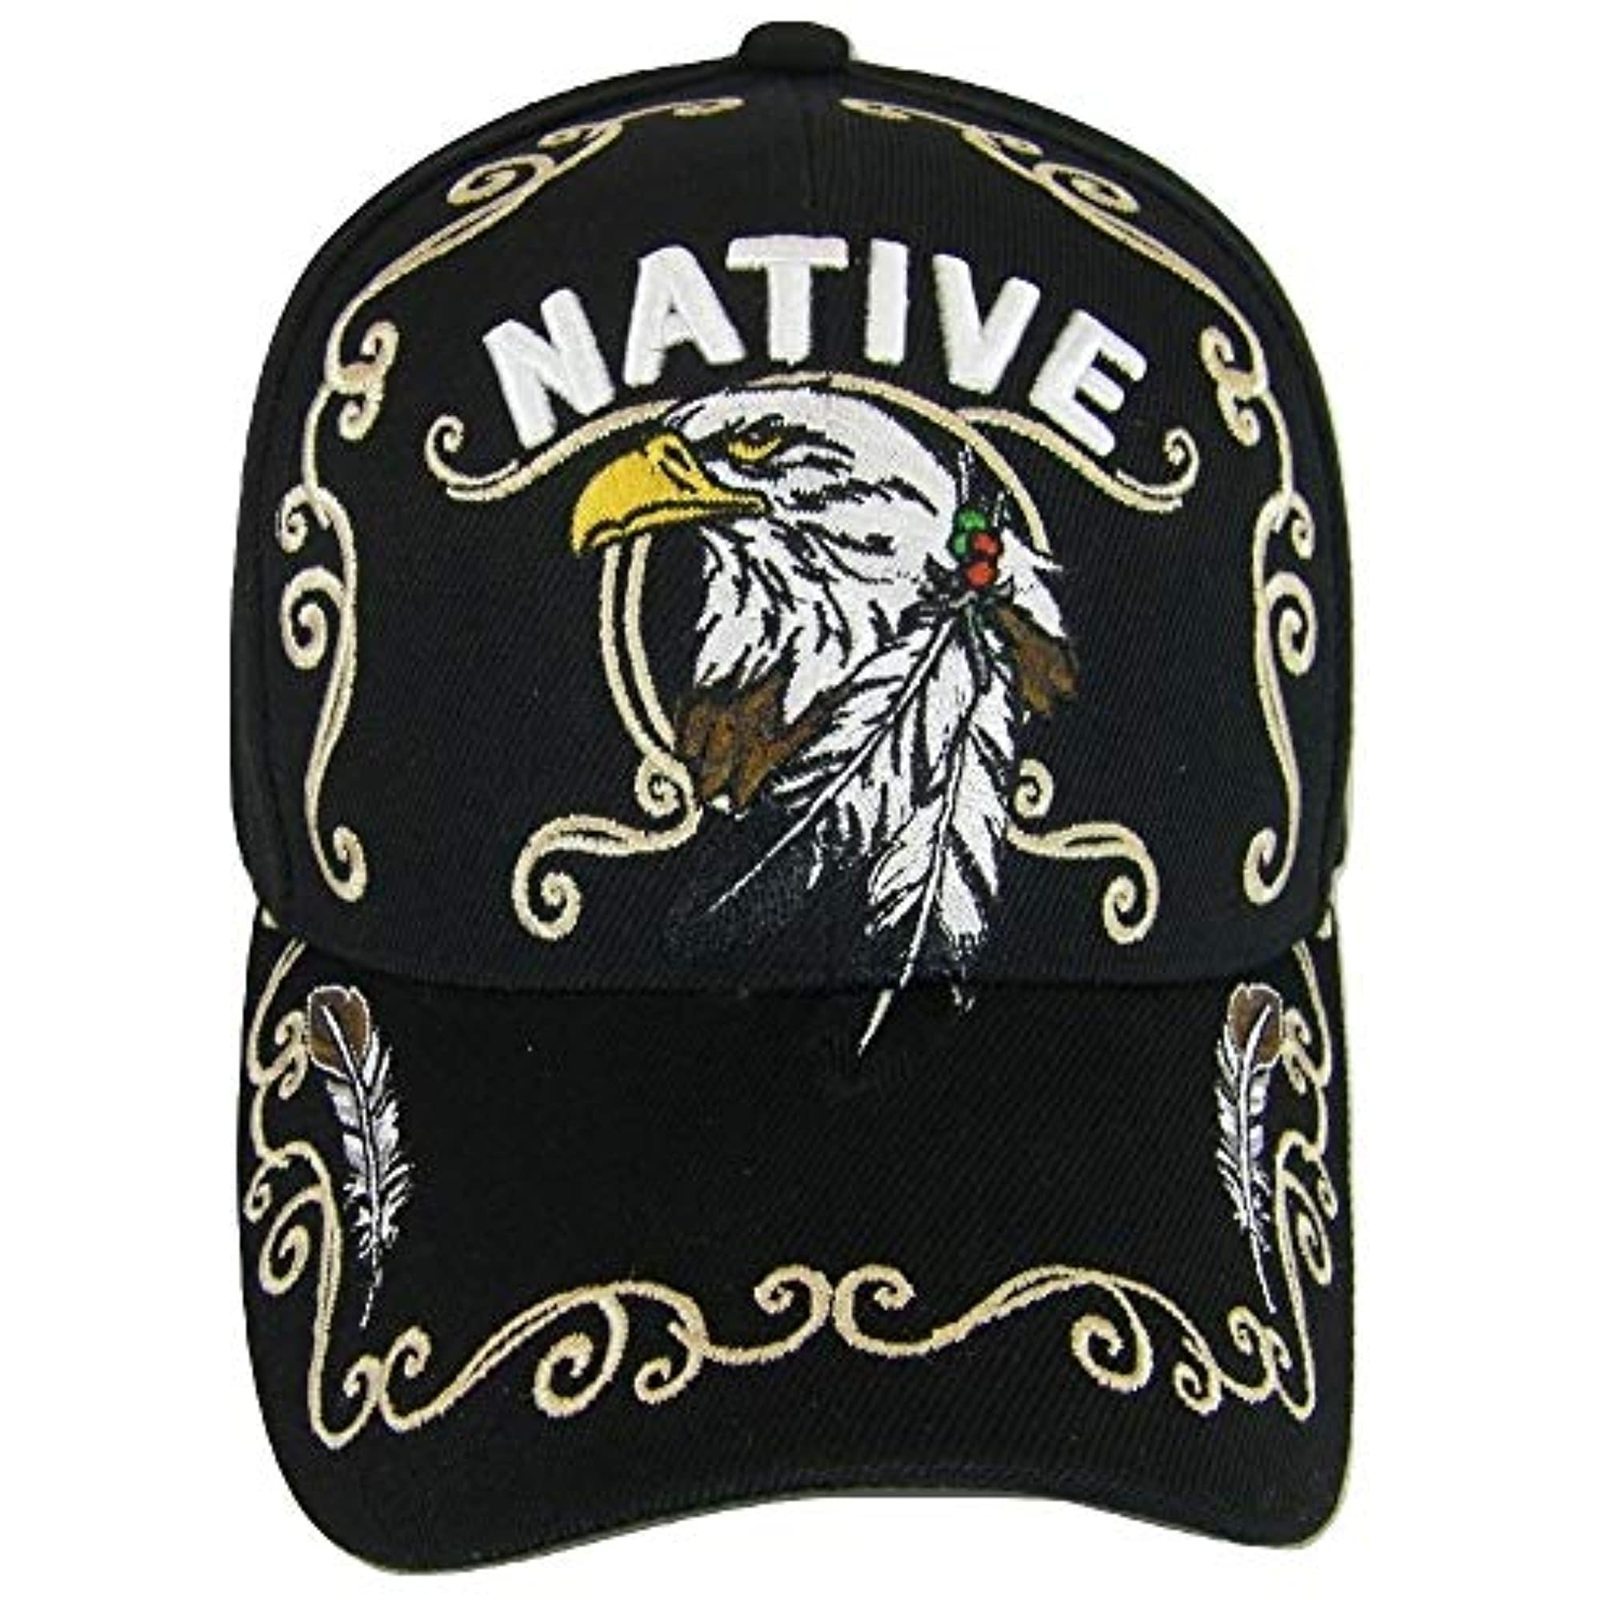 Native Pride Eagle Adjustable Baseball Cap with Feathers and Swirls (Black)